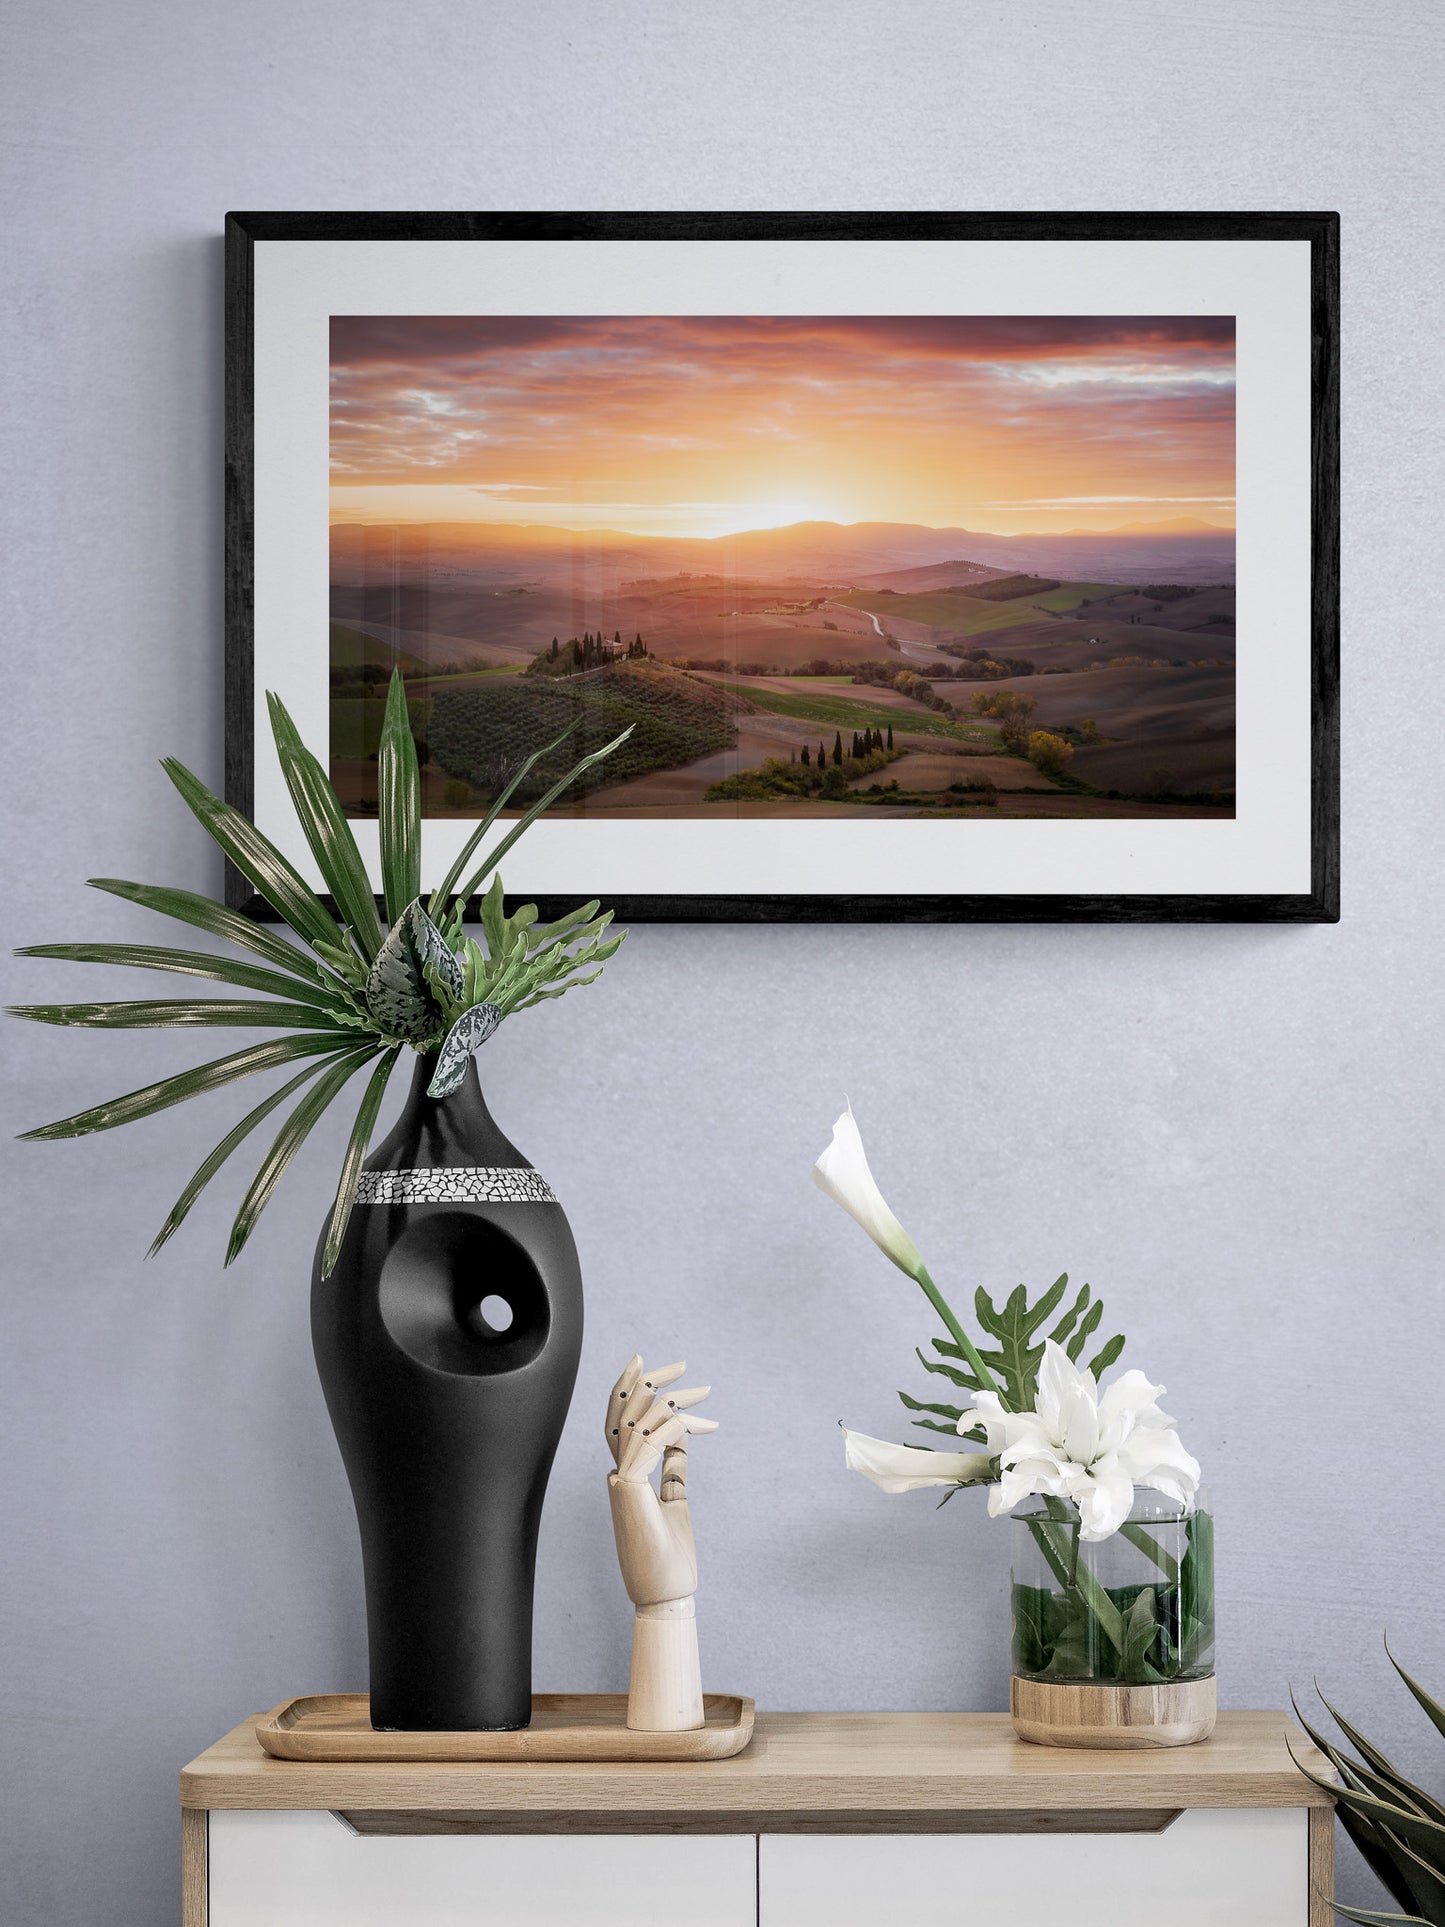 Image Title: Morning Glory Photographer: Marcus Danz Location: Val D'orcia, Italy Image description: The rolling hills of Tuscany and Podere Belvedere are caressed by the soft light of the morning sky. High quality Fine Art print up to 36 inch / around 90 centimeters on Hahnemühle paper available. Medium variant over sideboard.